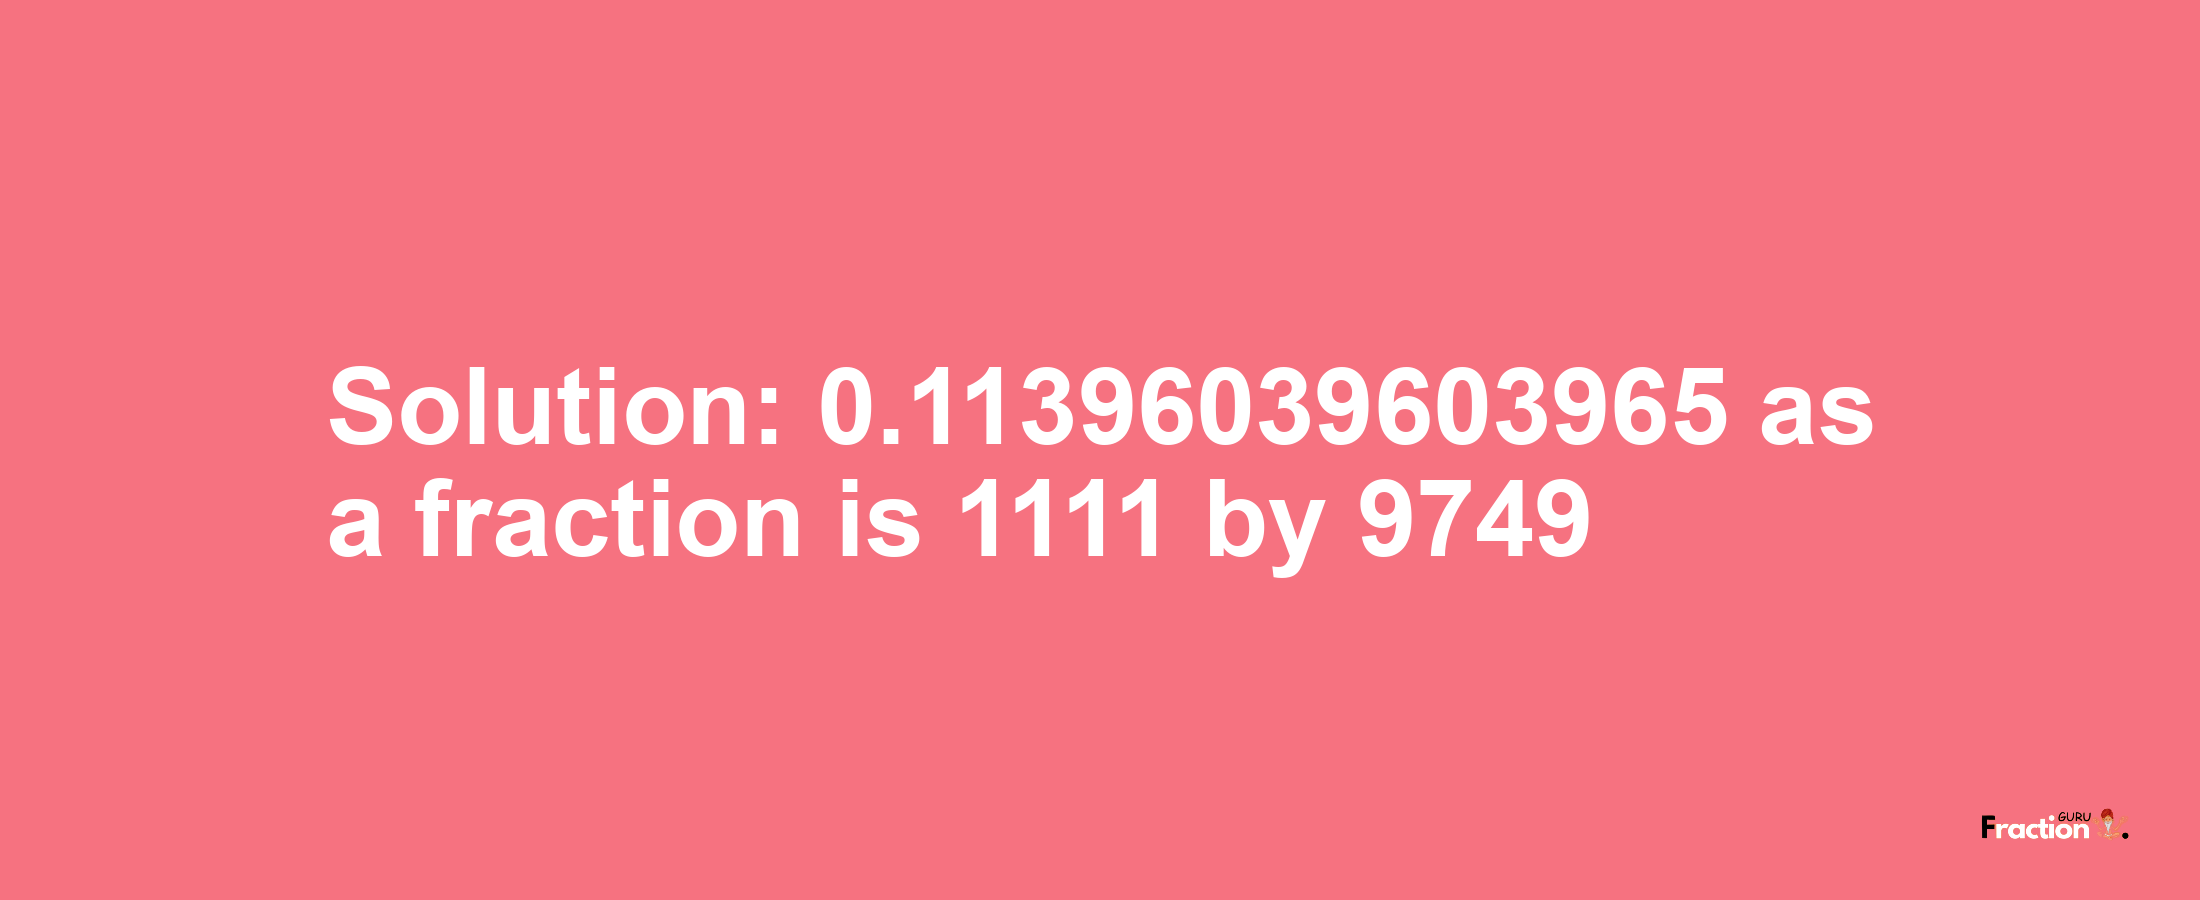 Solution:0.11396039603965 as a fraction is 1111/9749